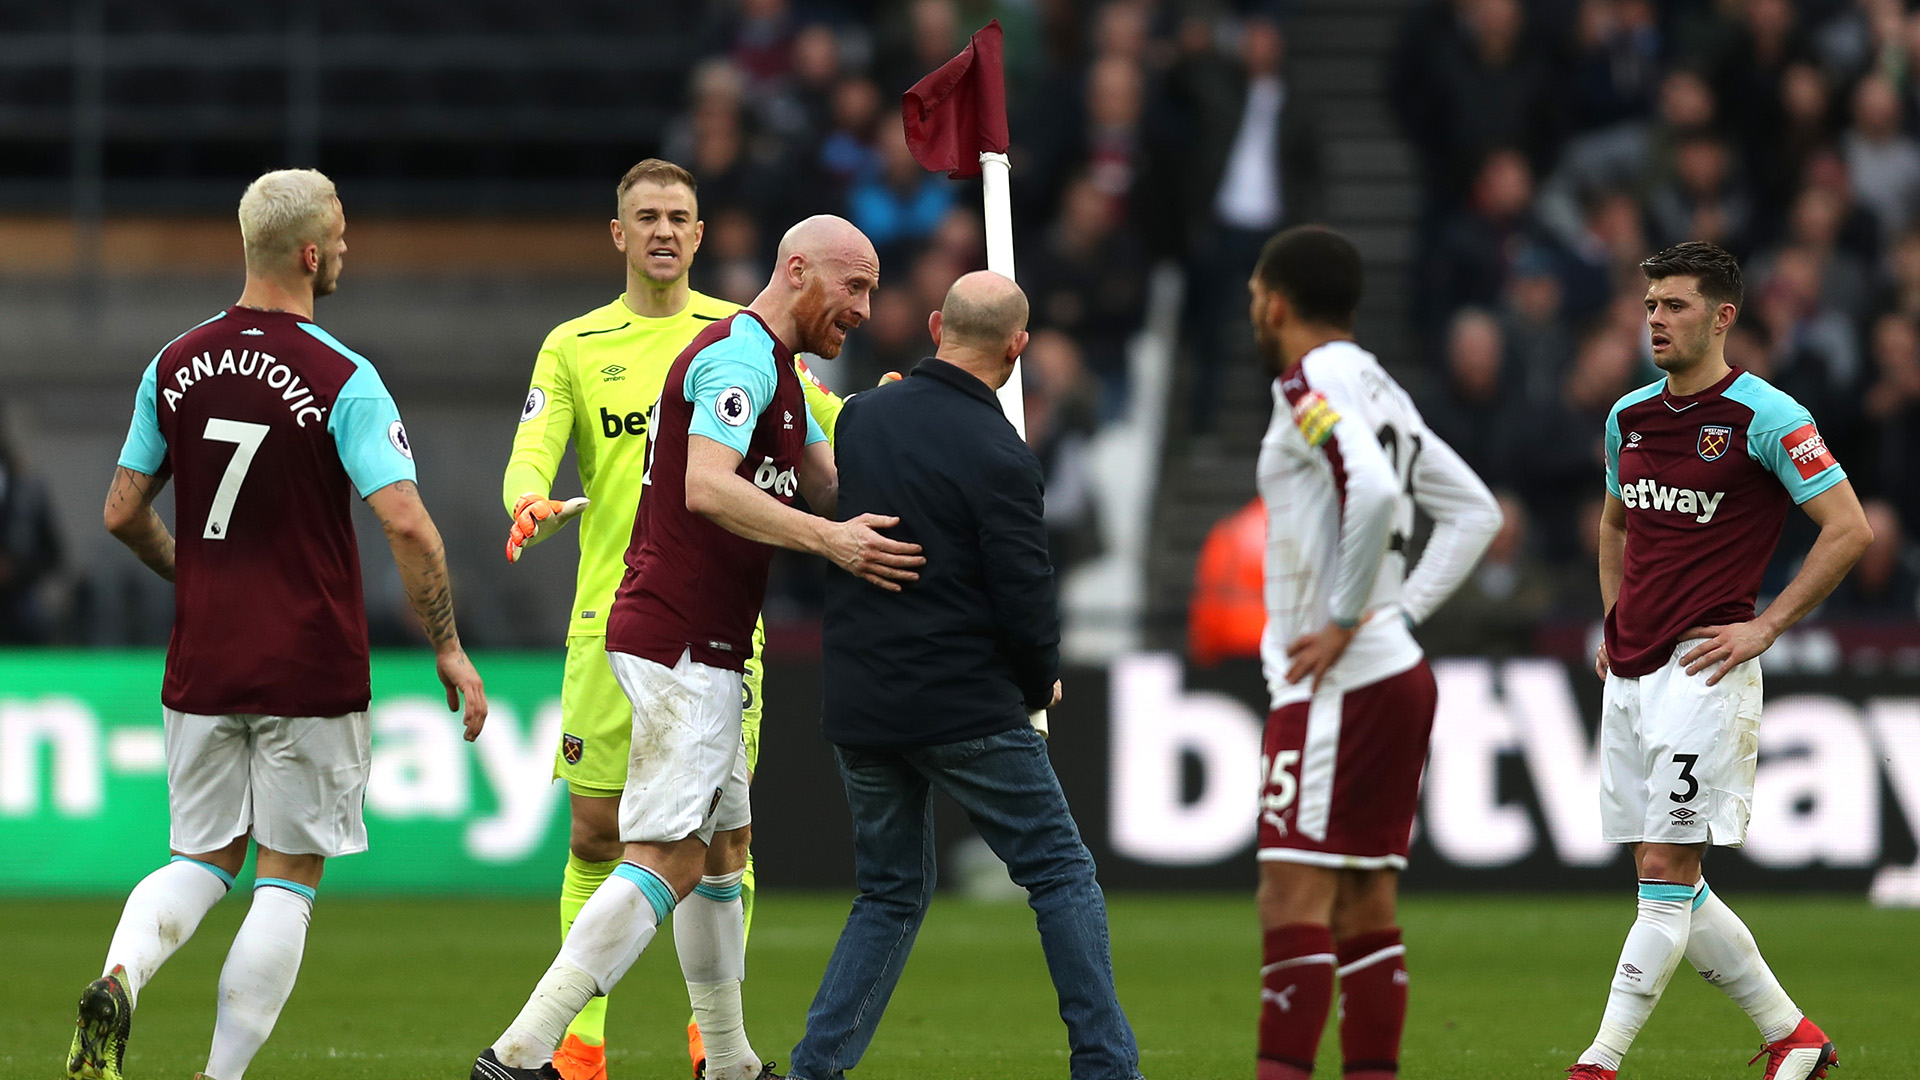 James Collins fan on pitch